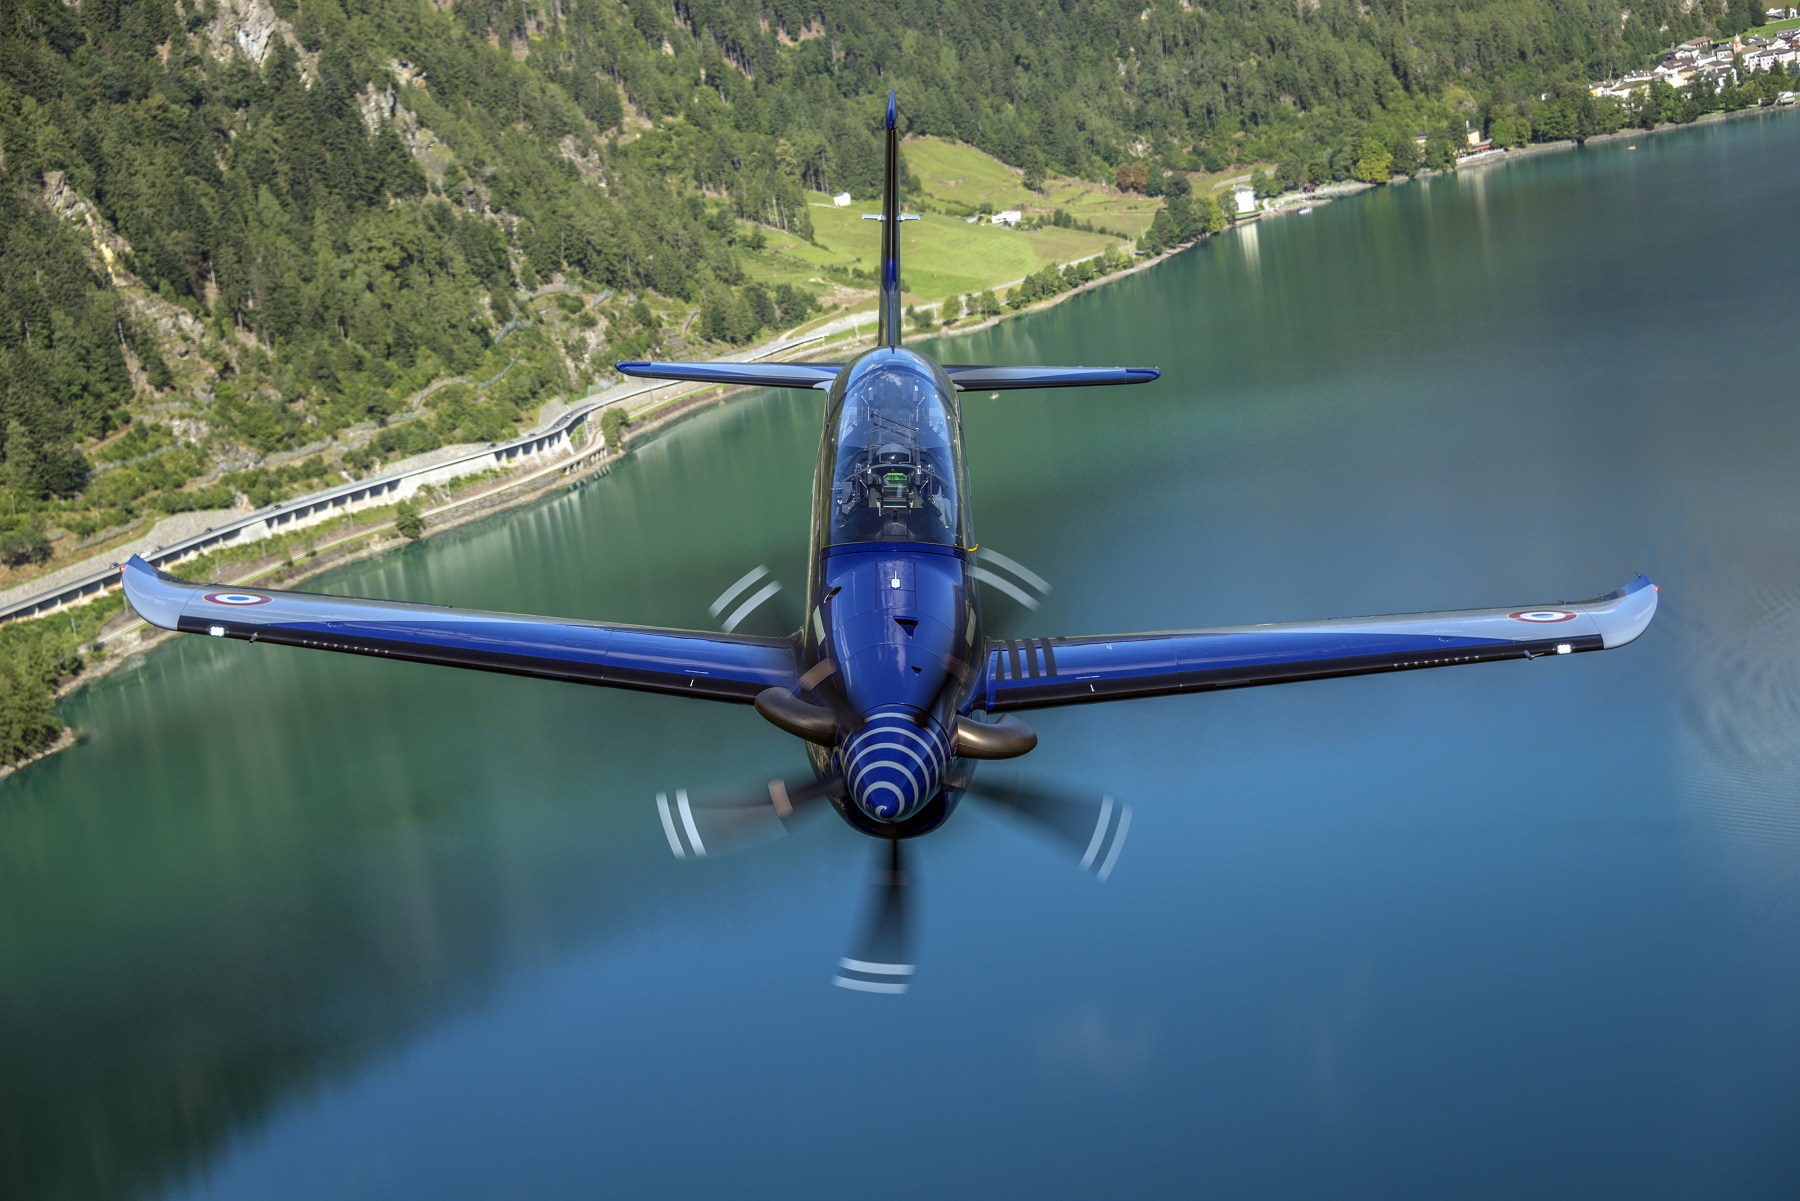 French Air Force Pilatus PC-21 Single-Engine Turboprop Trainer